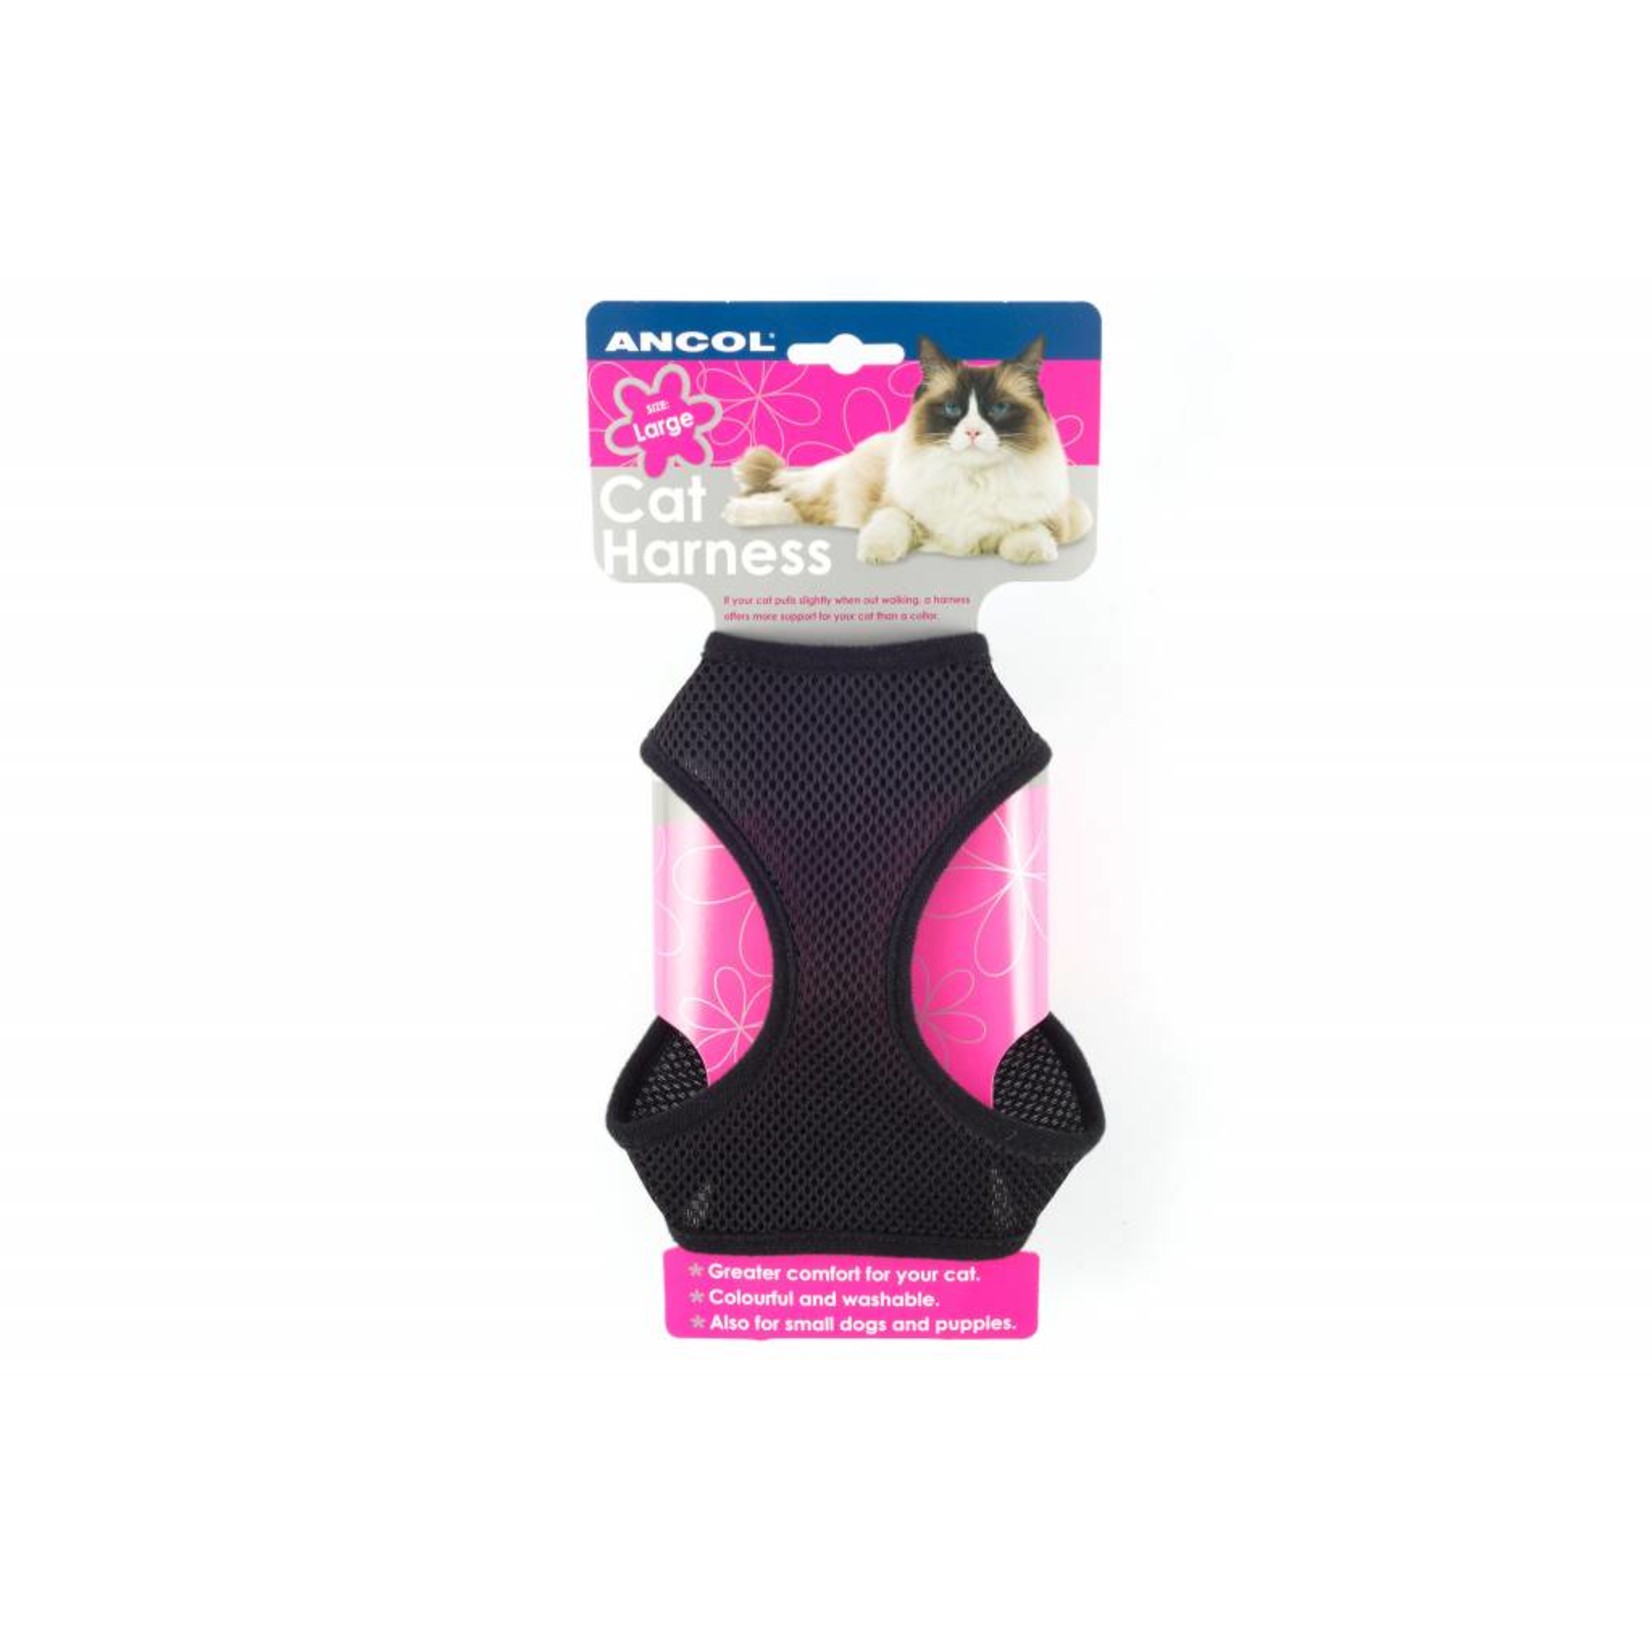 Ancol Large Soft Cat Harness